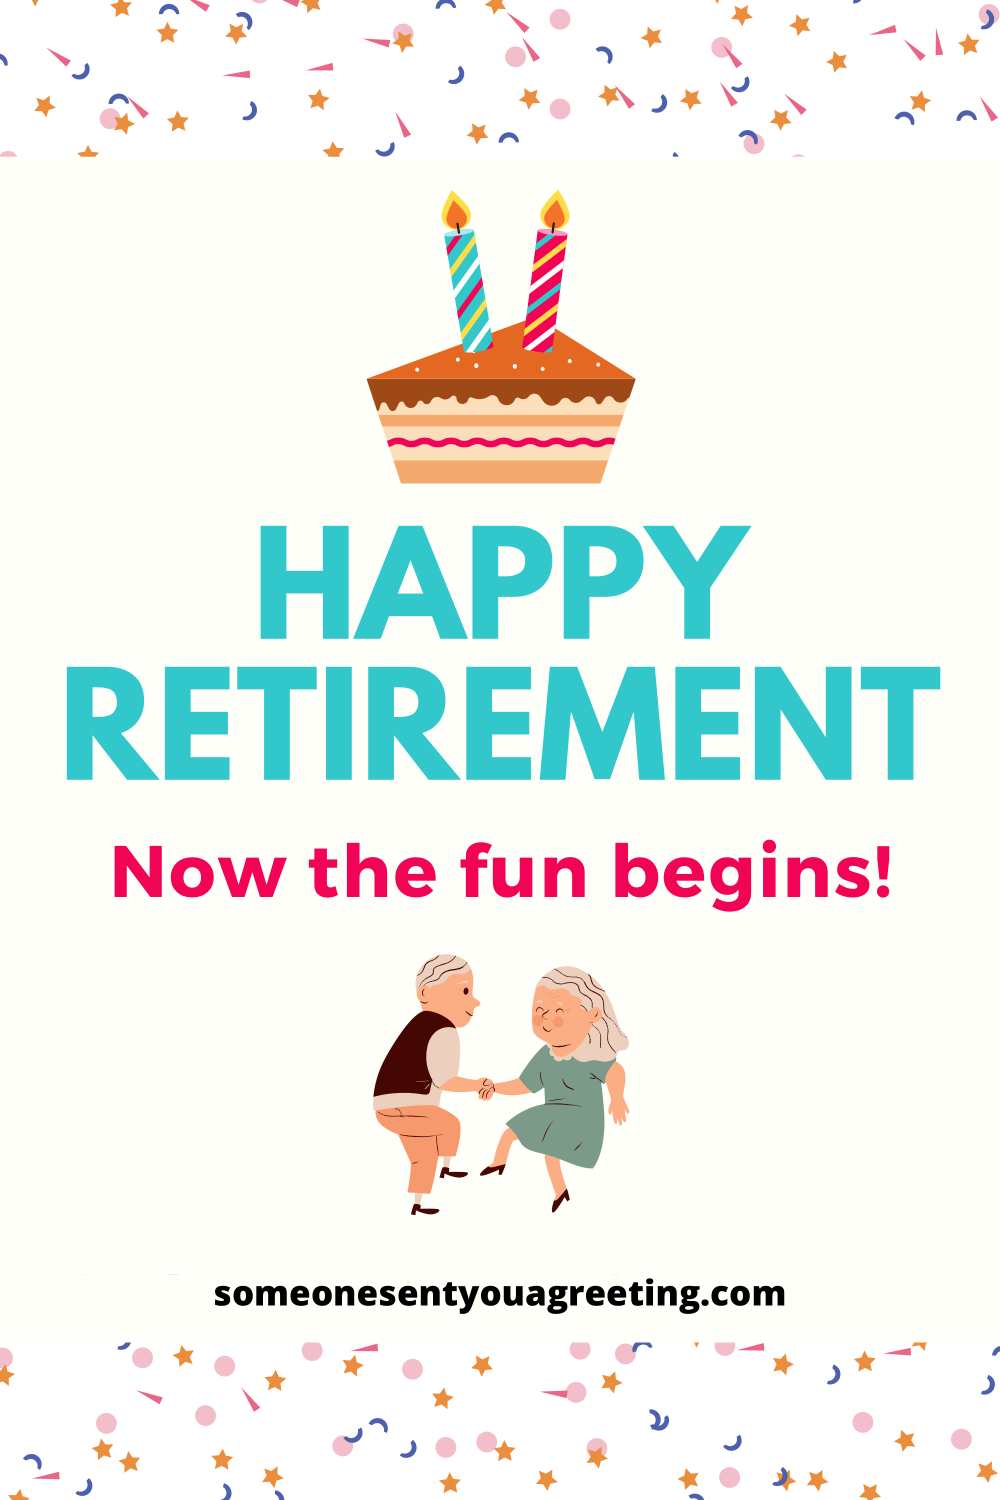 641+ Catchy Retirement Cake Slogans And Taglines (Generator + Guide) -  Thebrandboy.com